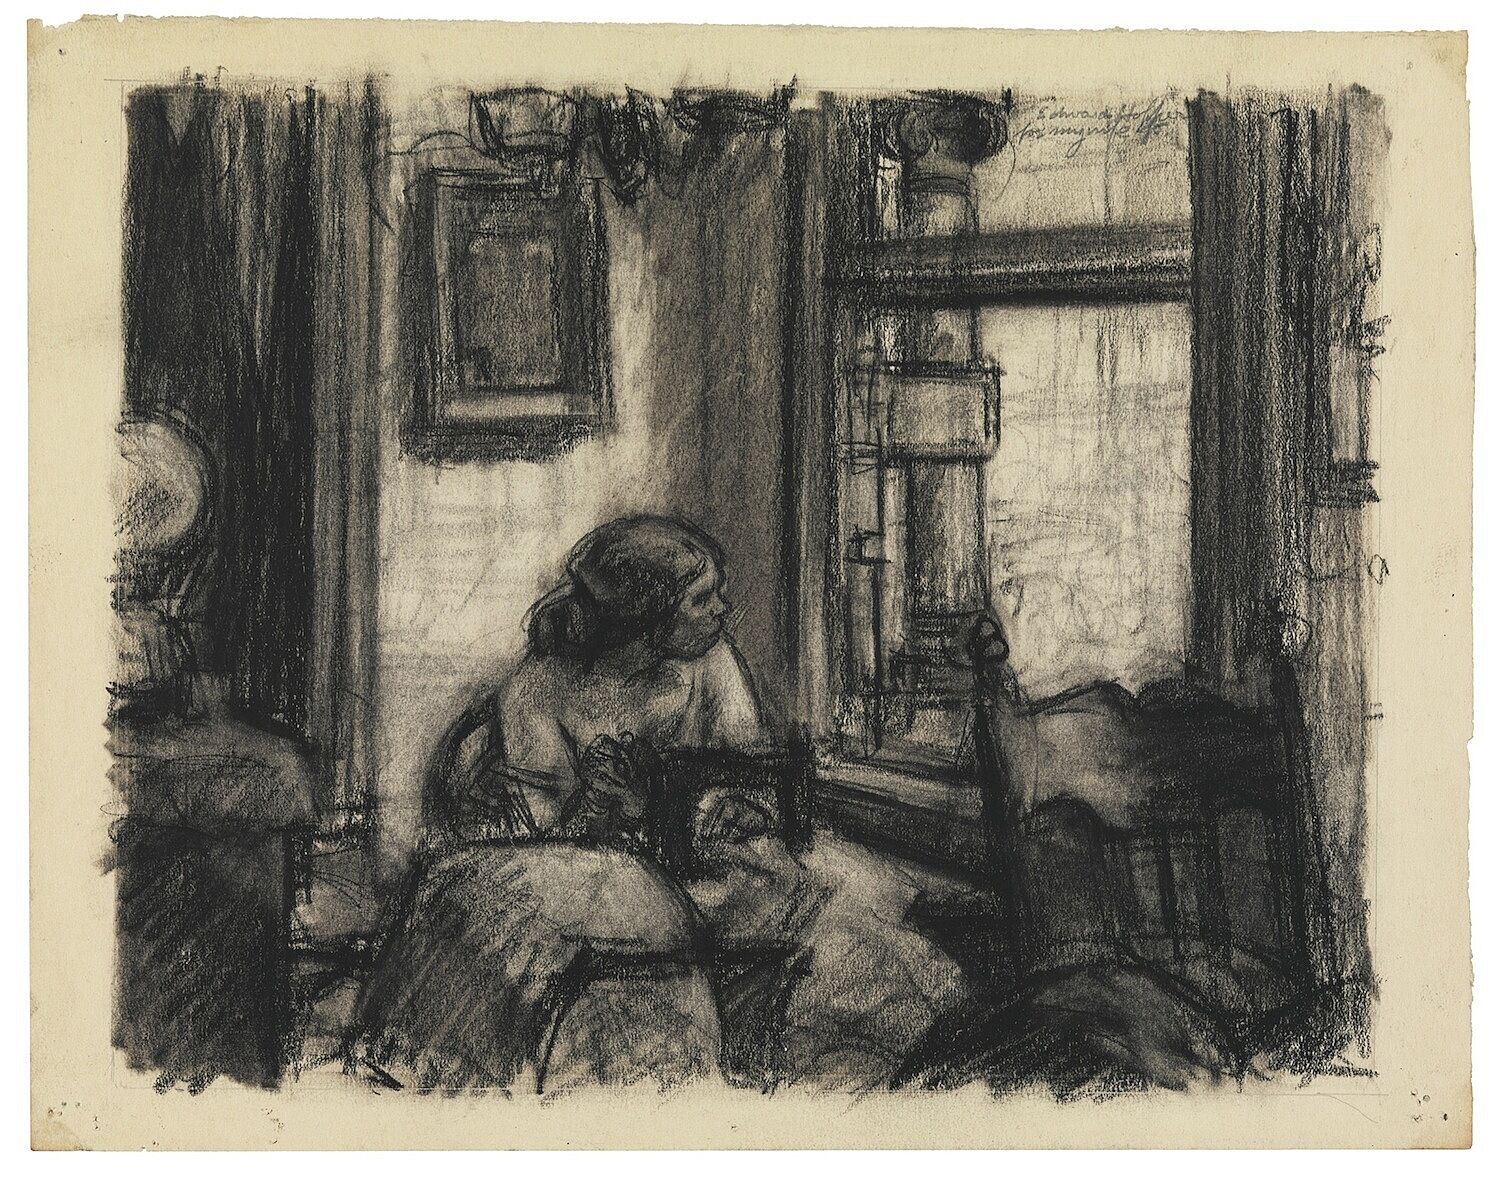 A drawing of a person looking out of a window.